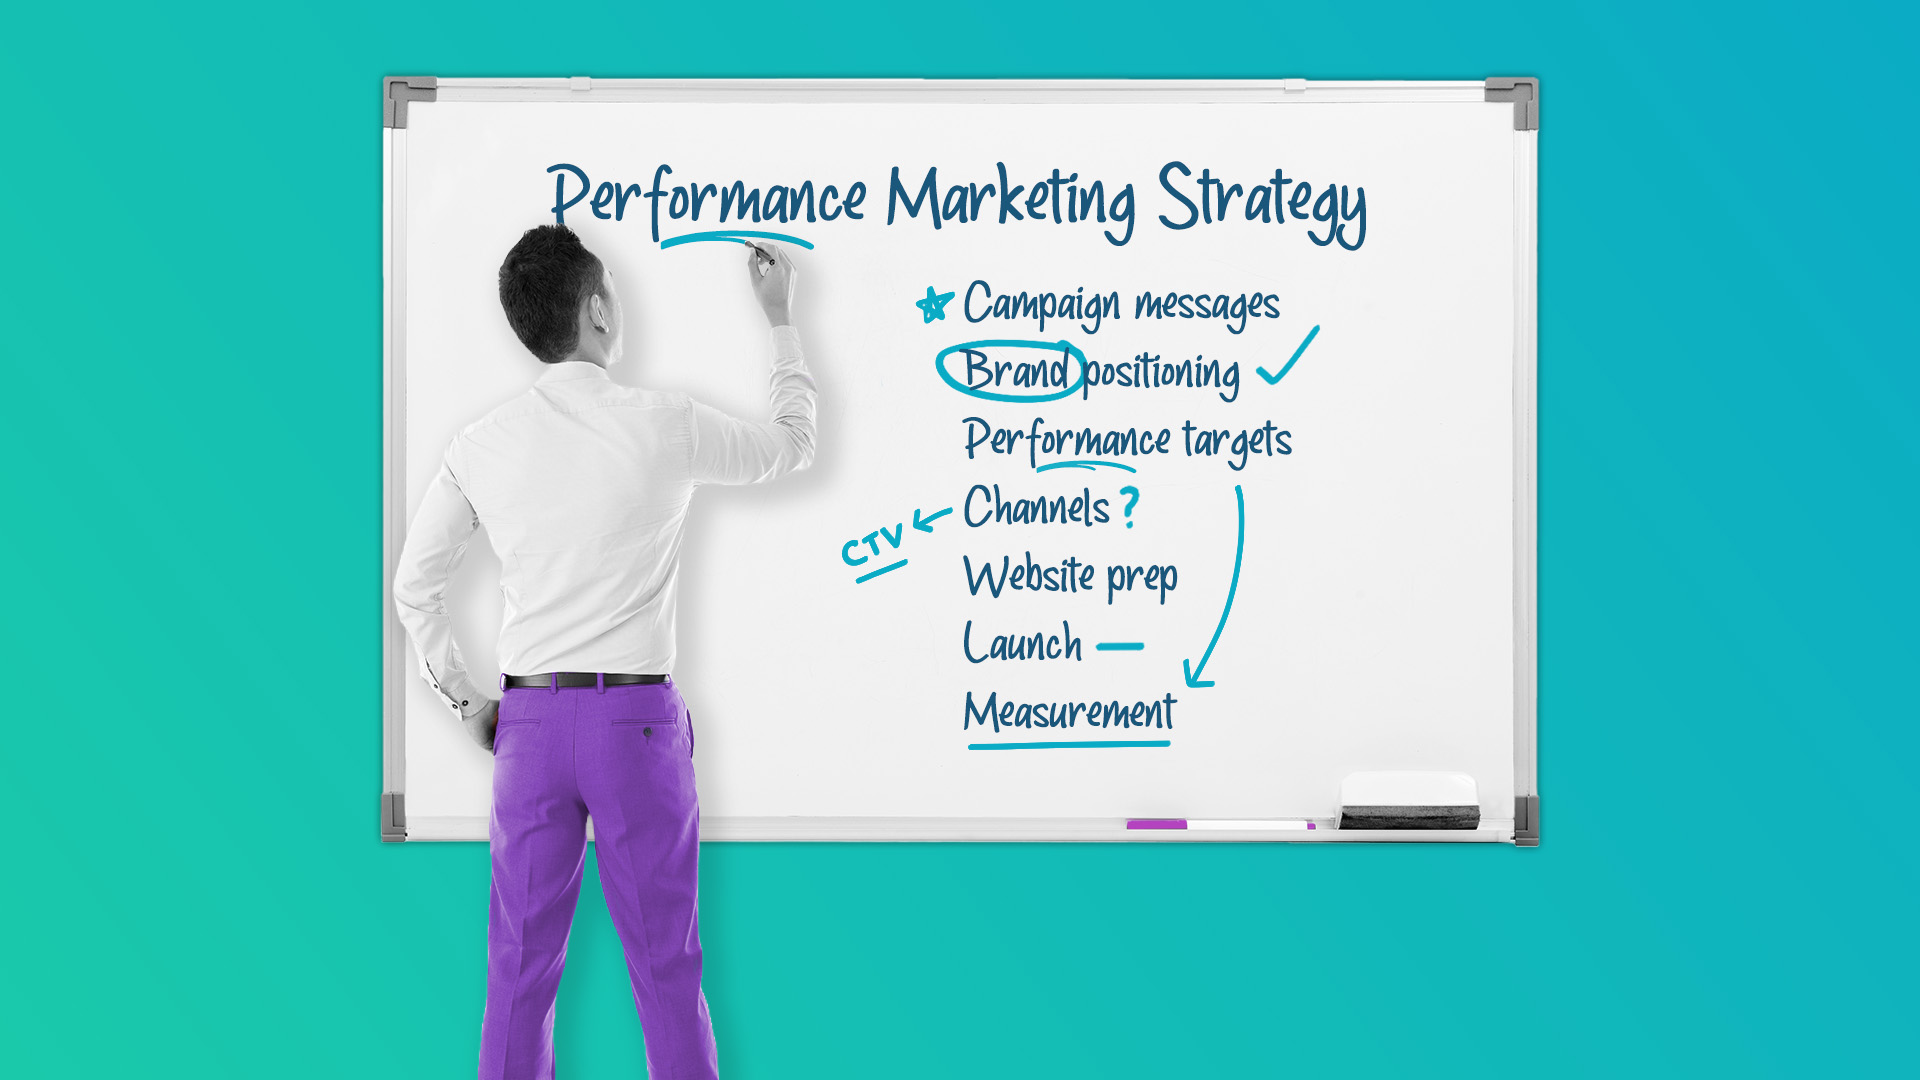 7 Steps to a Successful Performance Marketing Strategy